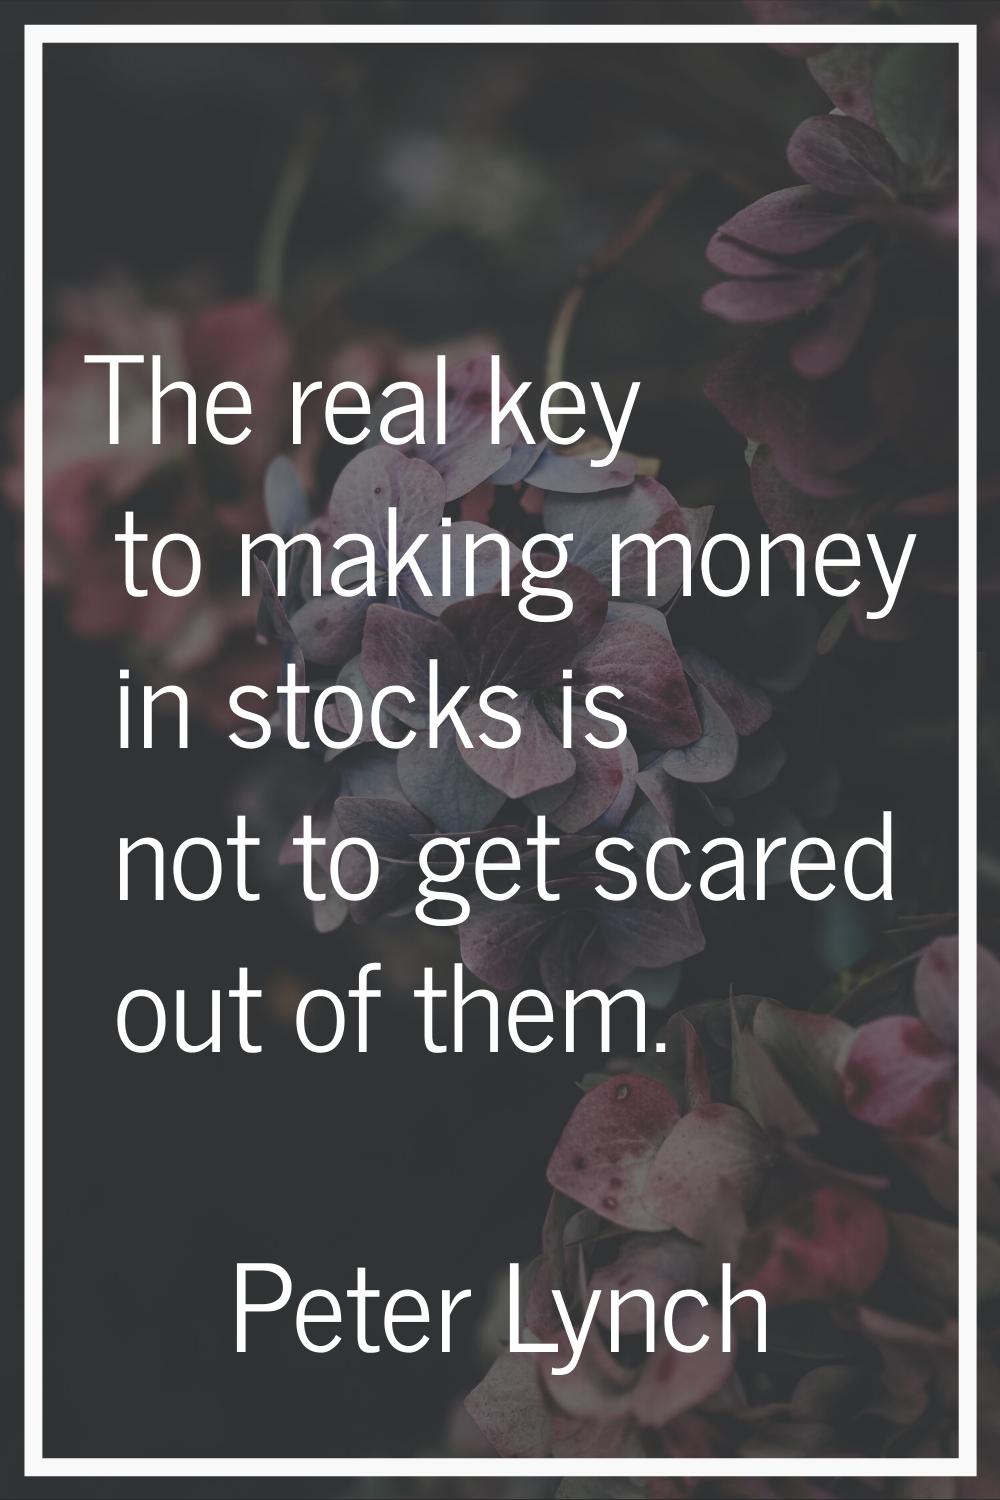 The real key to making money in stocks is not to get scared out of them.